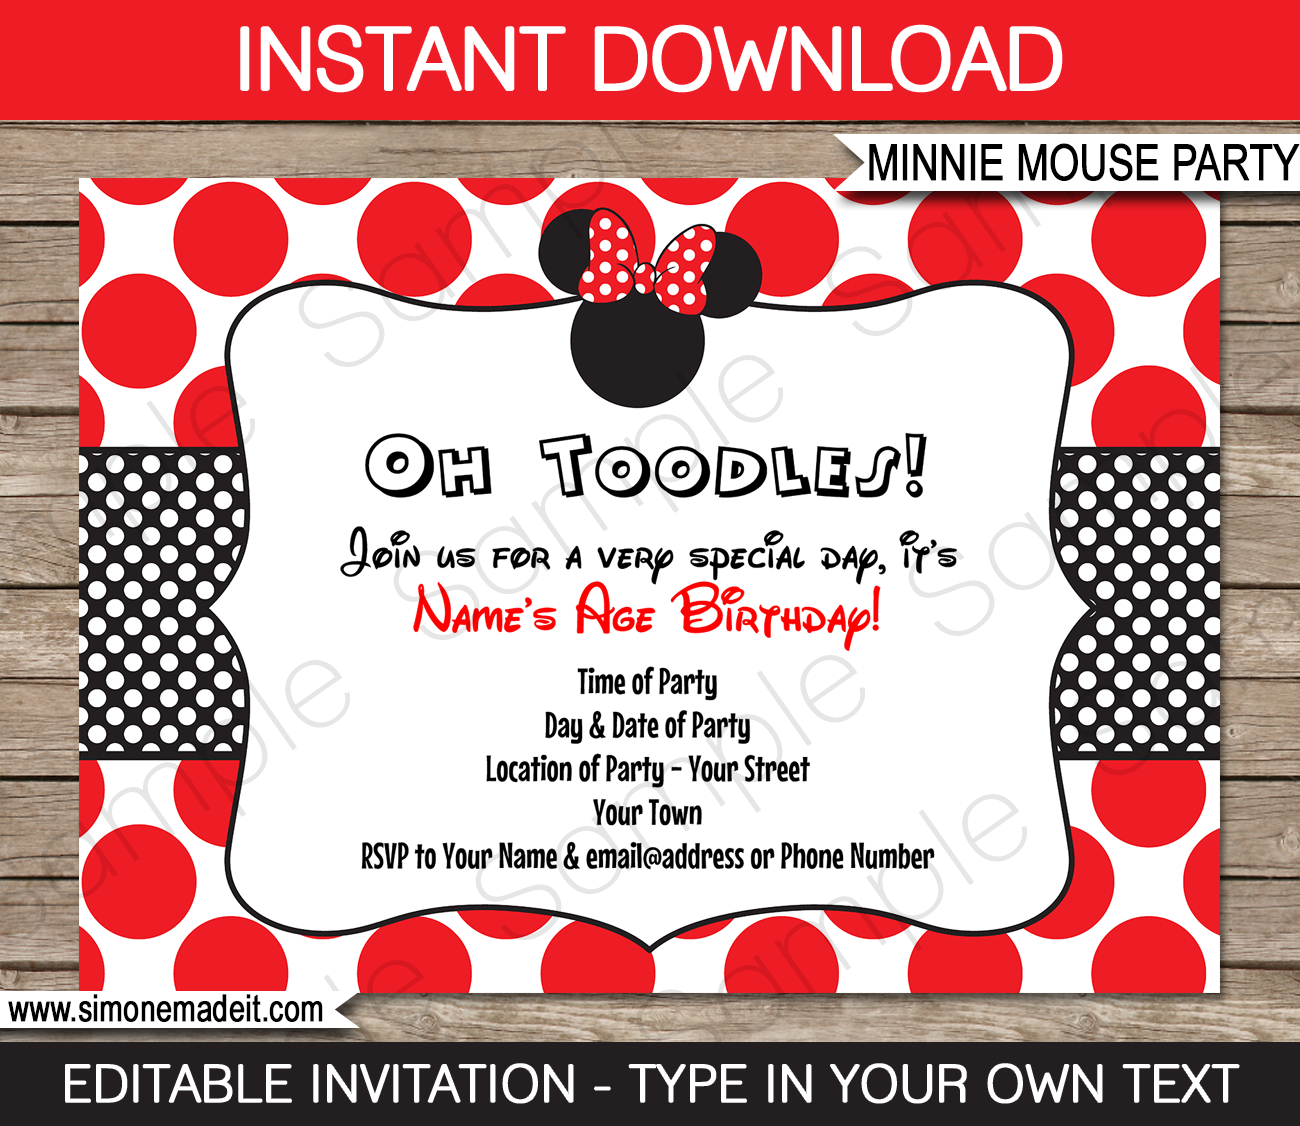 Minnie Mouse Birthday Party Invitations Template | Red - Free Printable Minnie Mouse Party Invitations